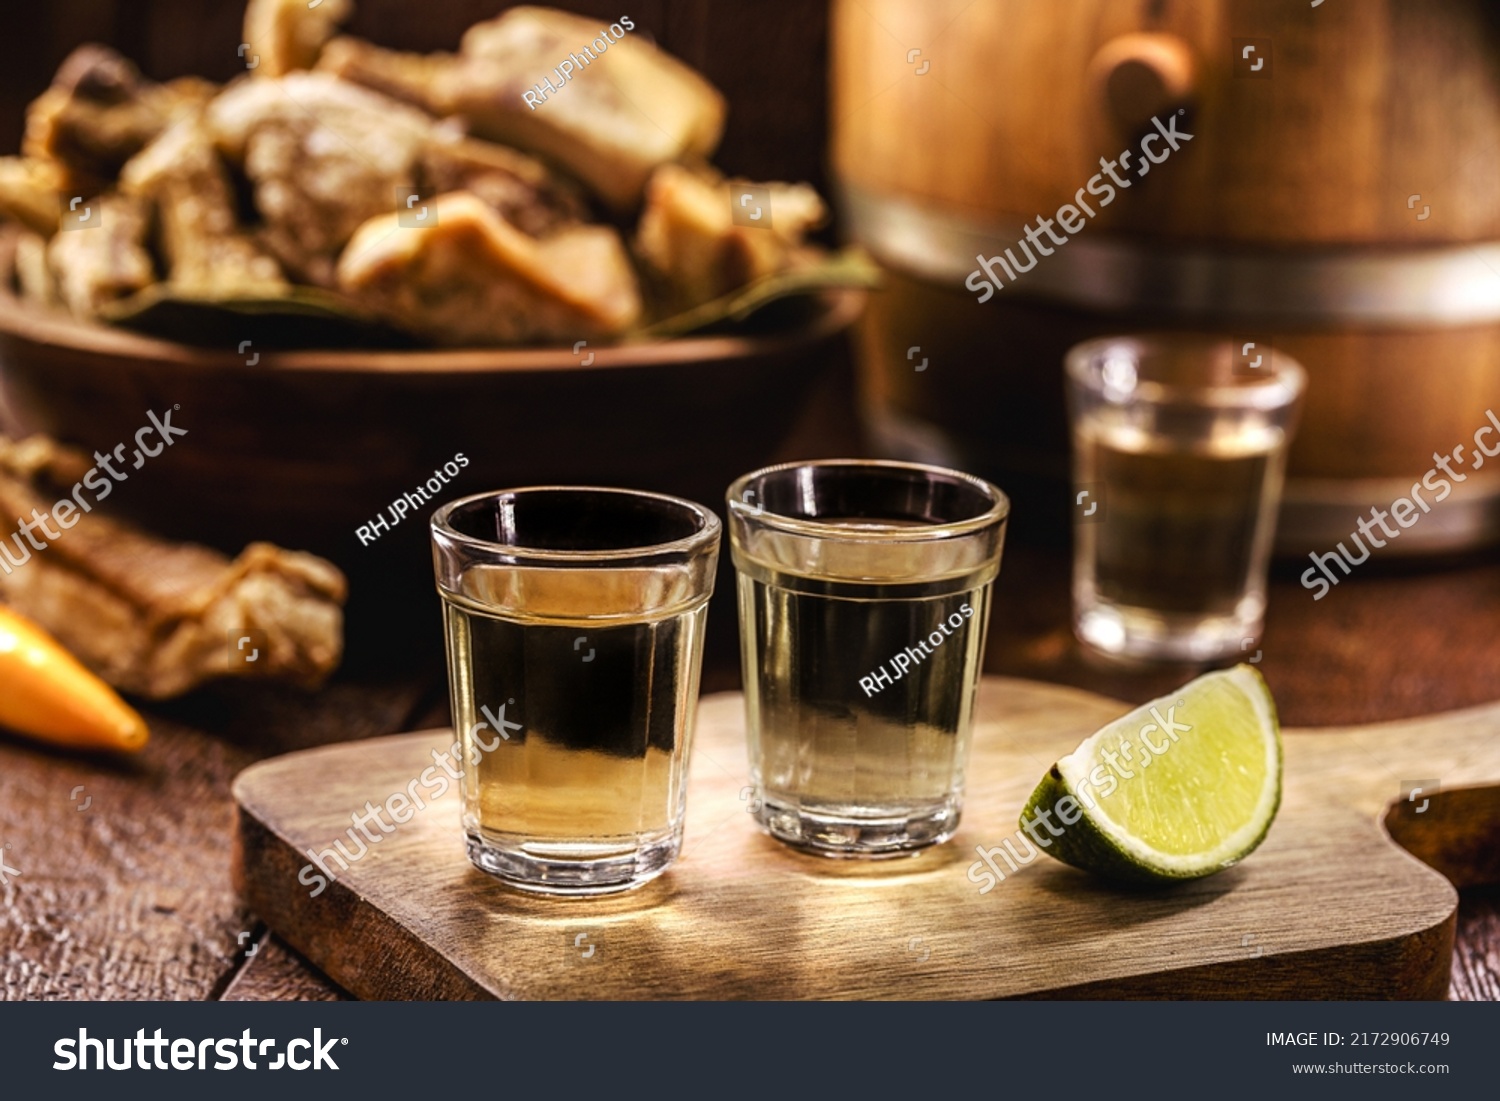 Cachaça, pinga, cana or caninha is the sugar cane brandy, a typical drink from Brazil, with a crackling appetizer in the background #2172906749